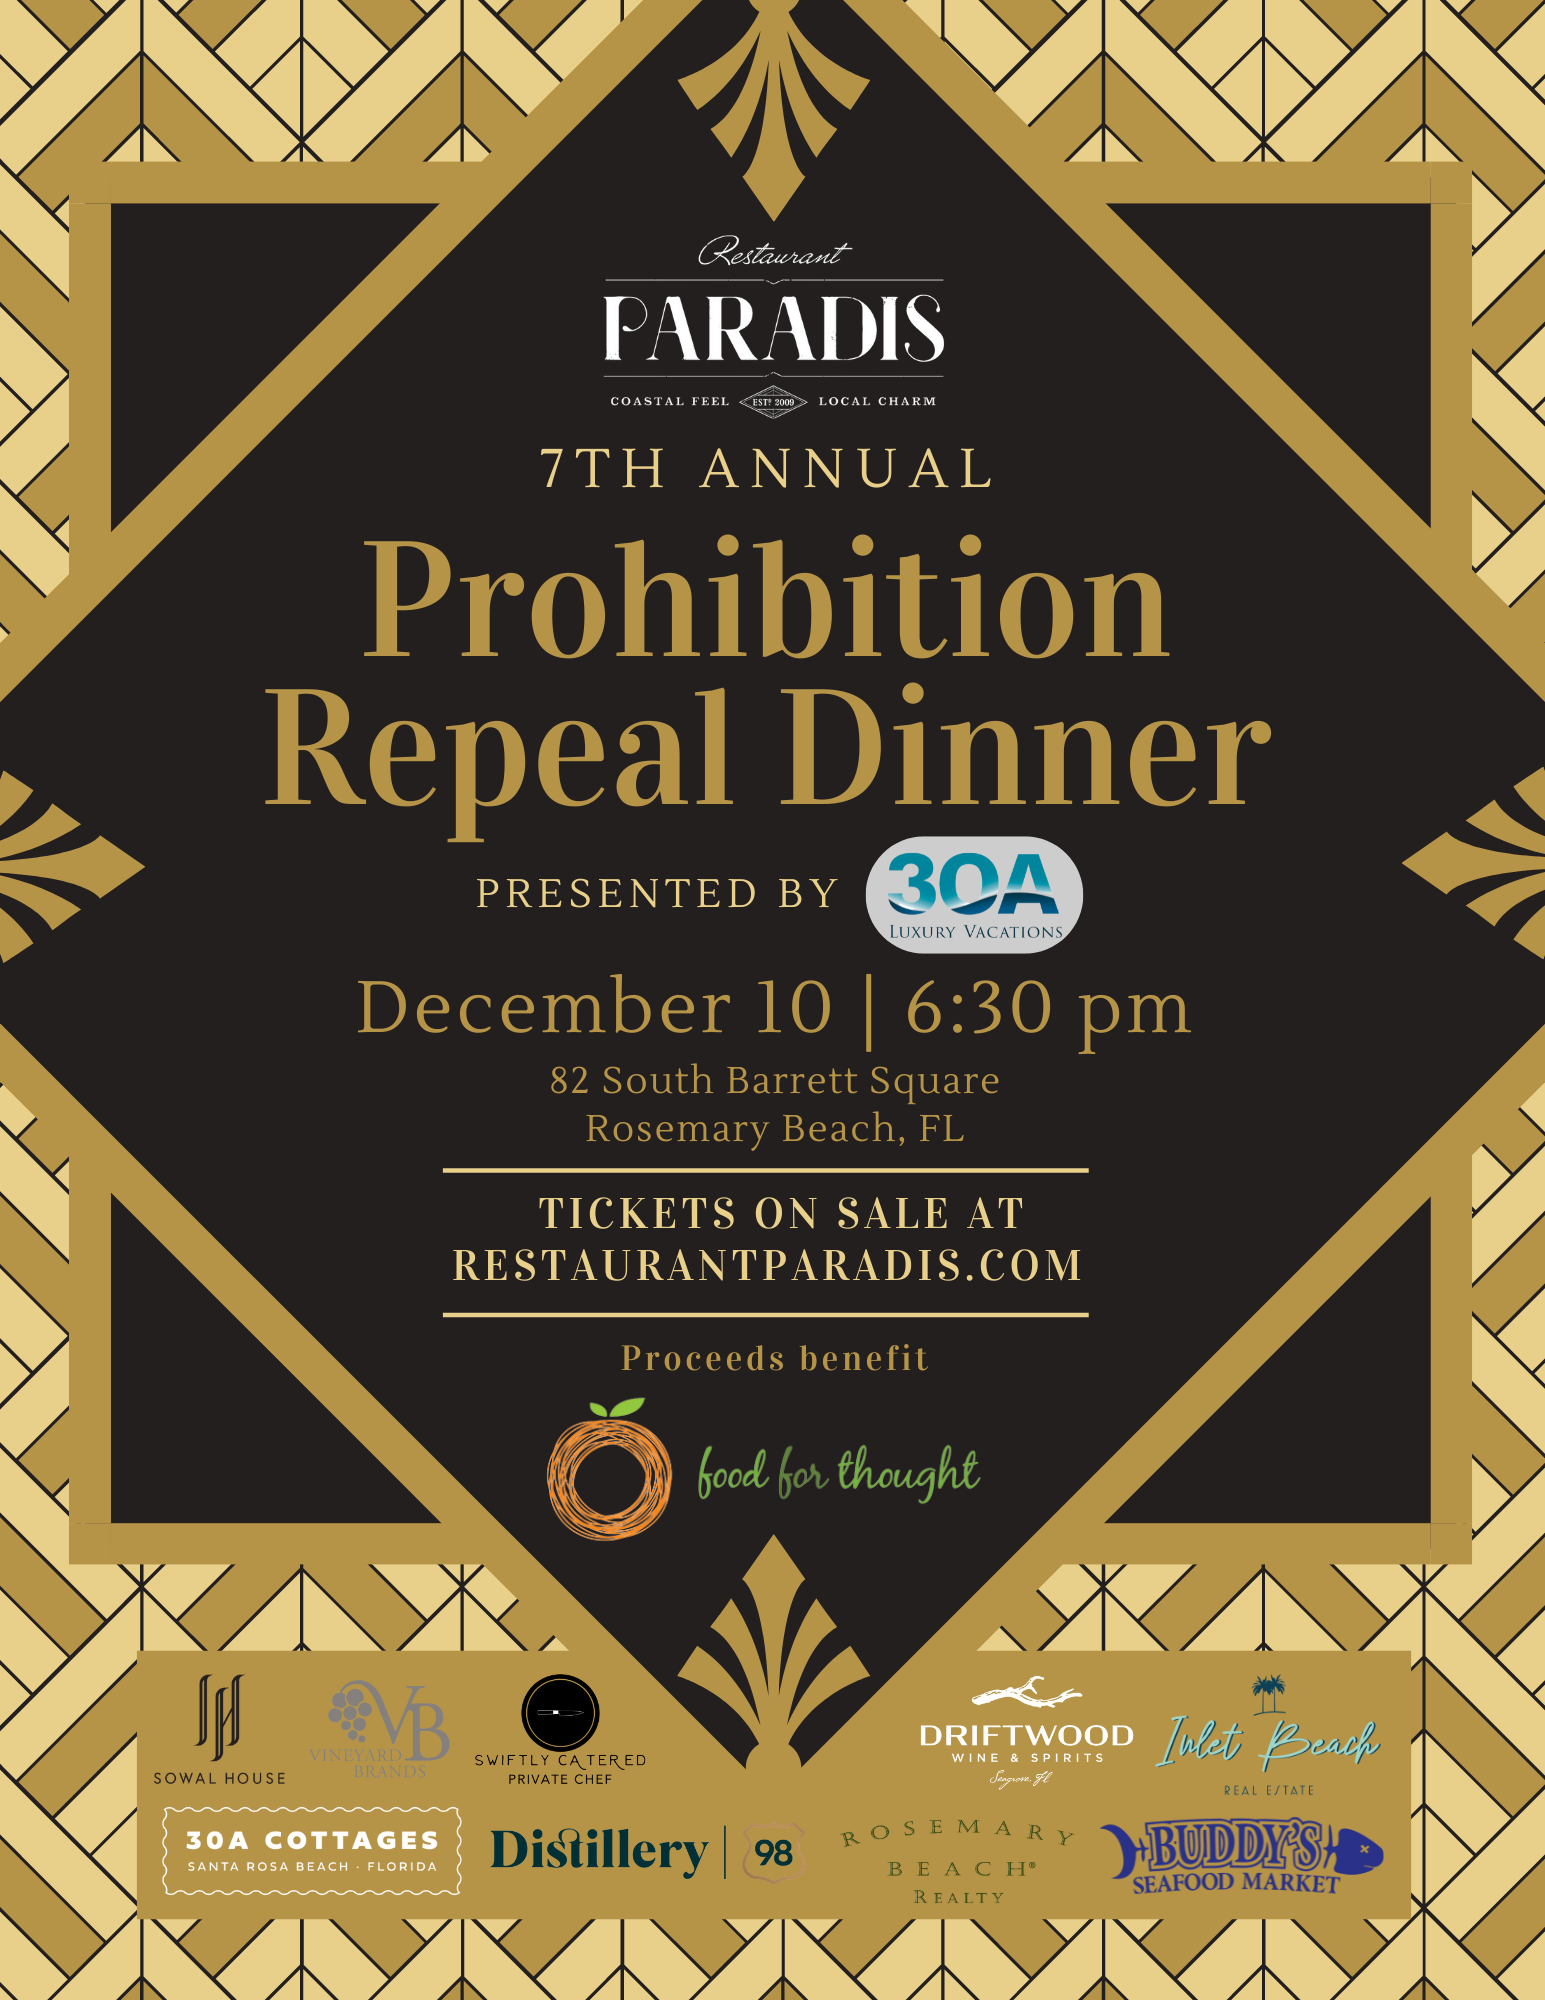 Restaurant Paradis Announces Seventh Annual Prohibition Repeal Wine Dinner Benefitting Food for Thought Outreach #30atv